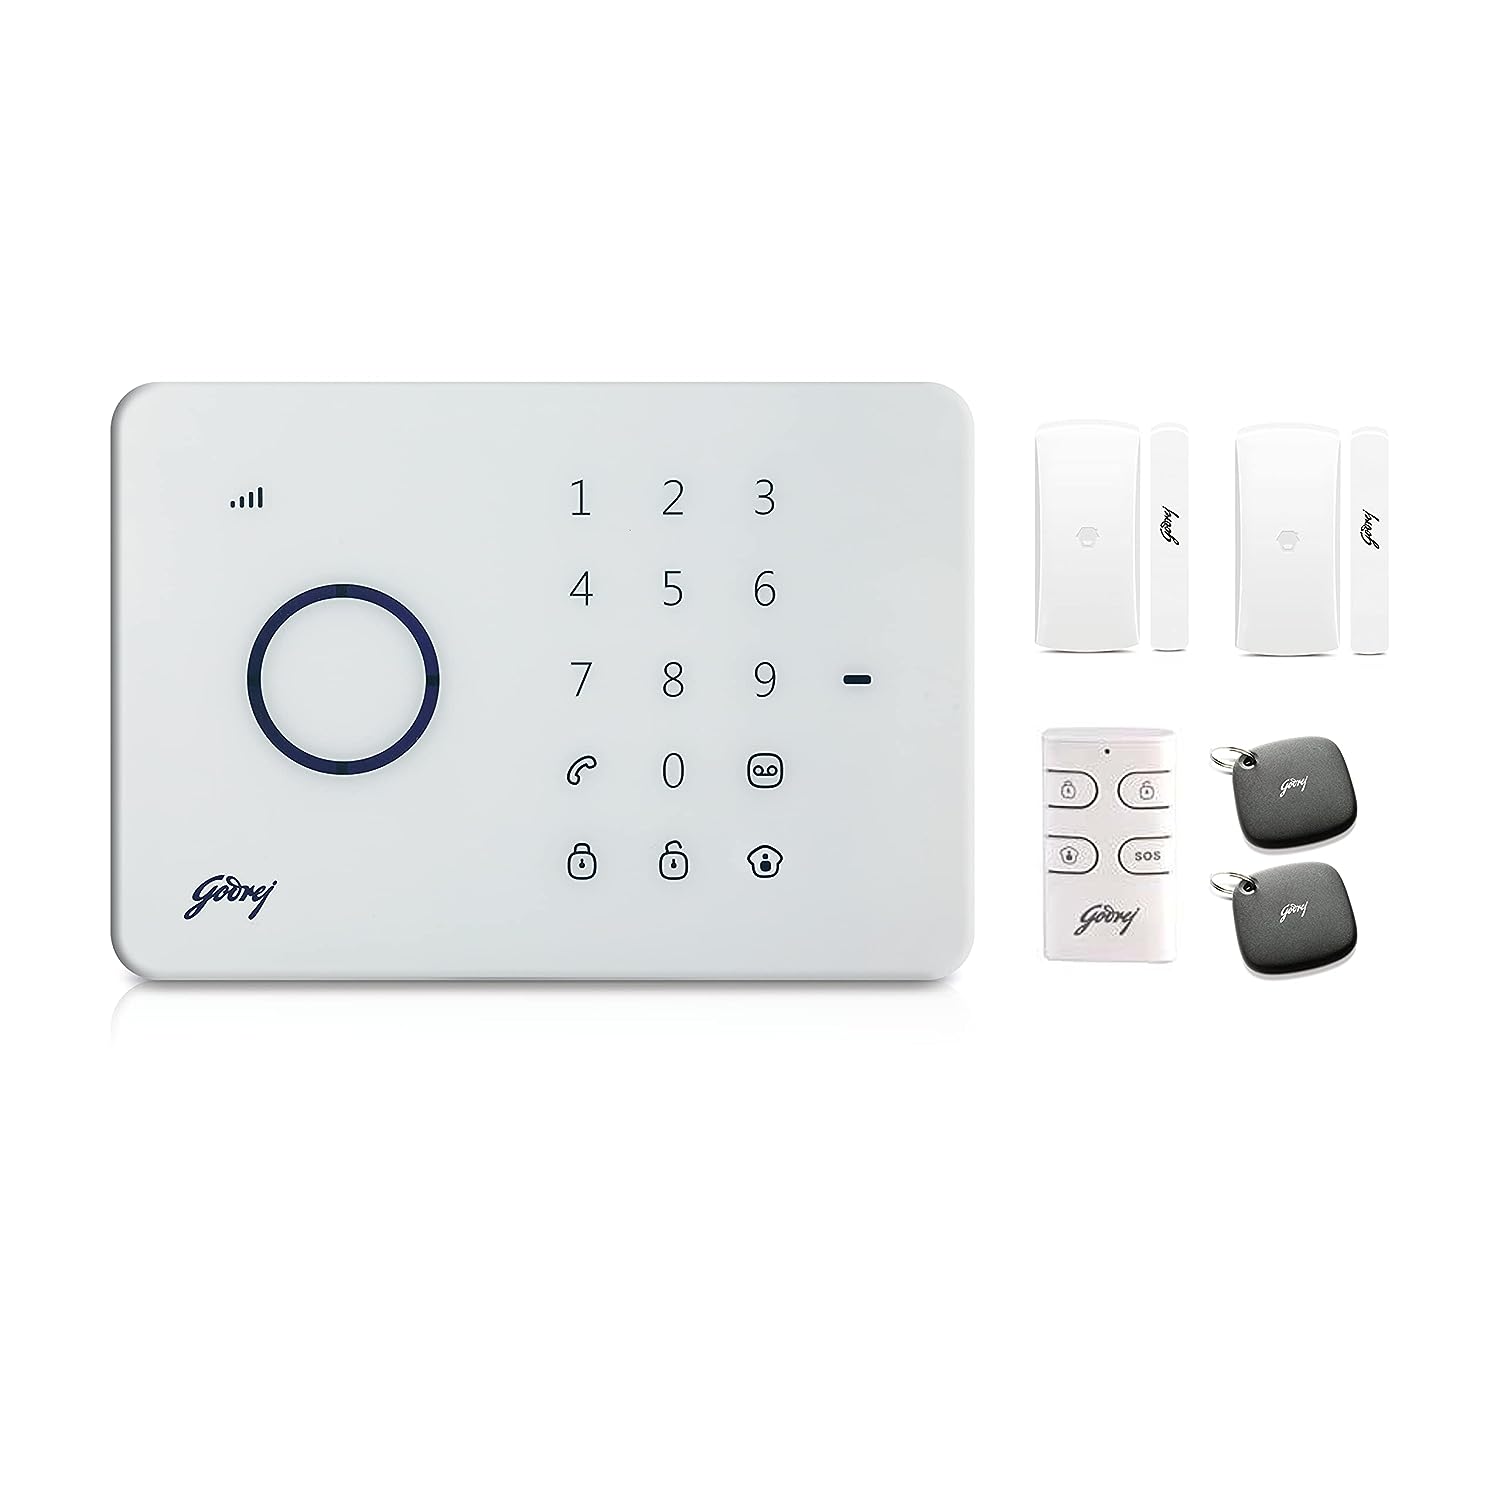 Godrej Security Solutions Forte Alarm System|Remote Monitoring via Phone|Built-in Speaker for Siren|SMS Alerts & Phone Notifications| Scheduling/Controlling Arm and Disarm via Phone |5 Hour Stand-by